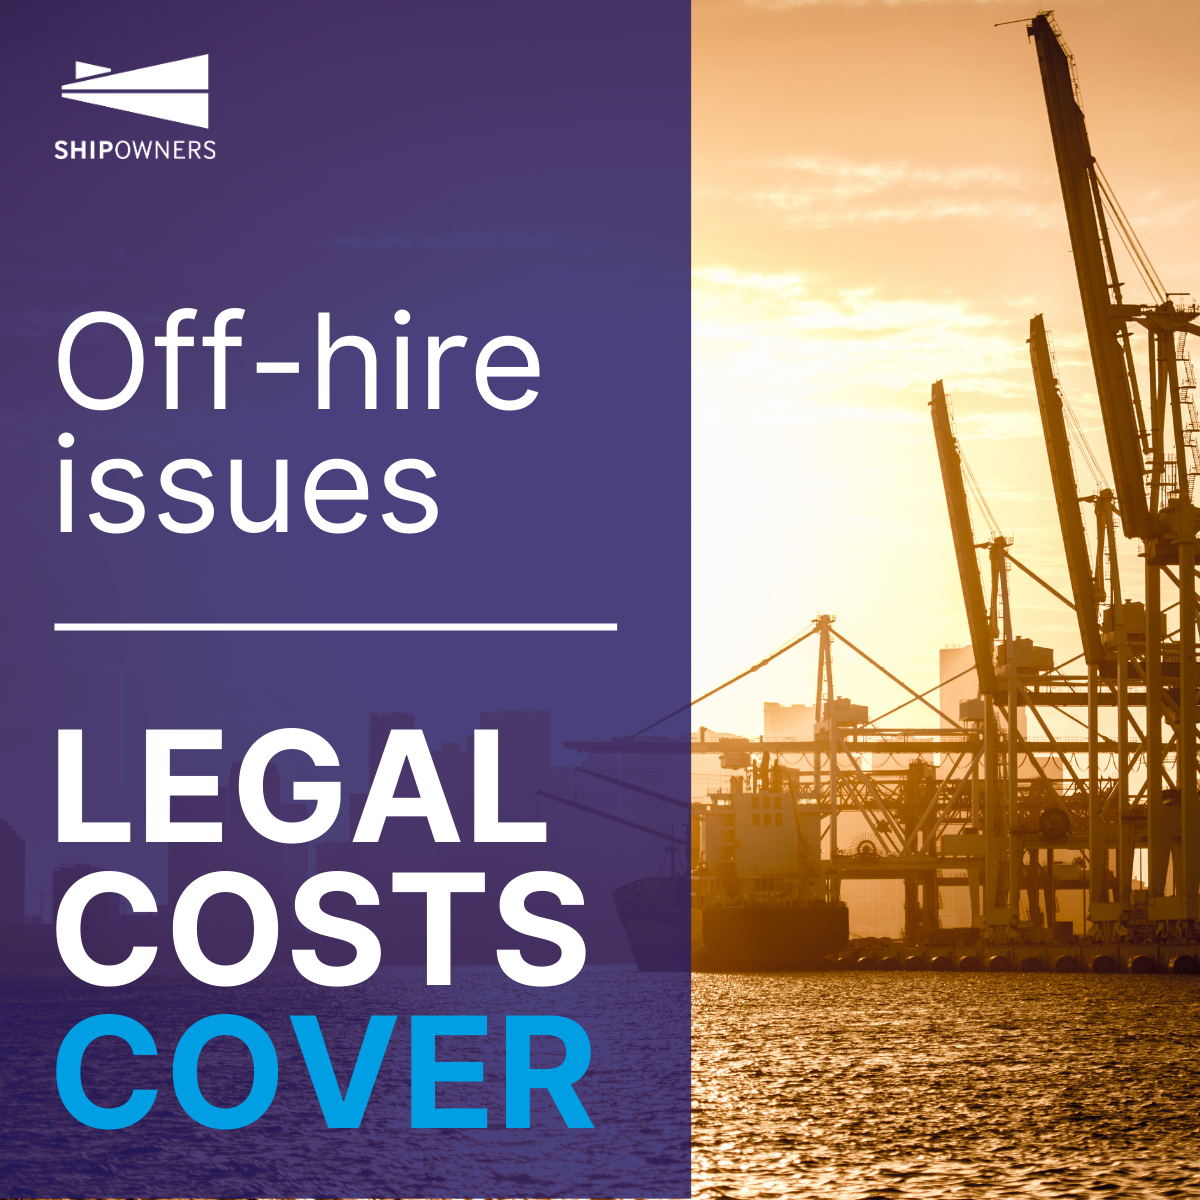 LEGAL COSTS COVER off-hire issues.png